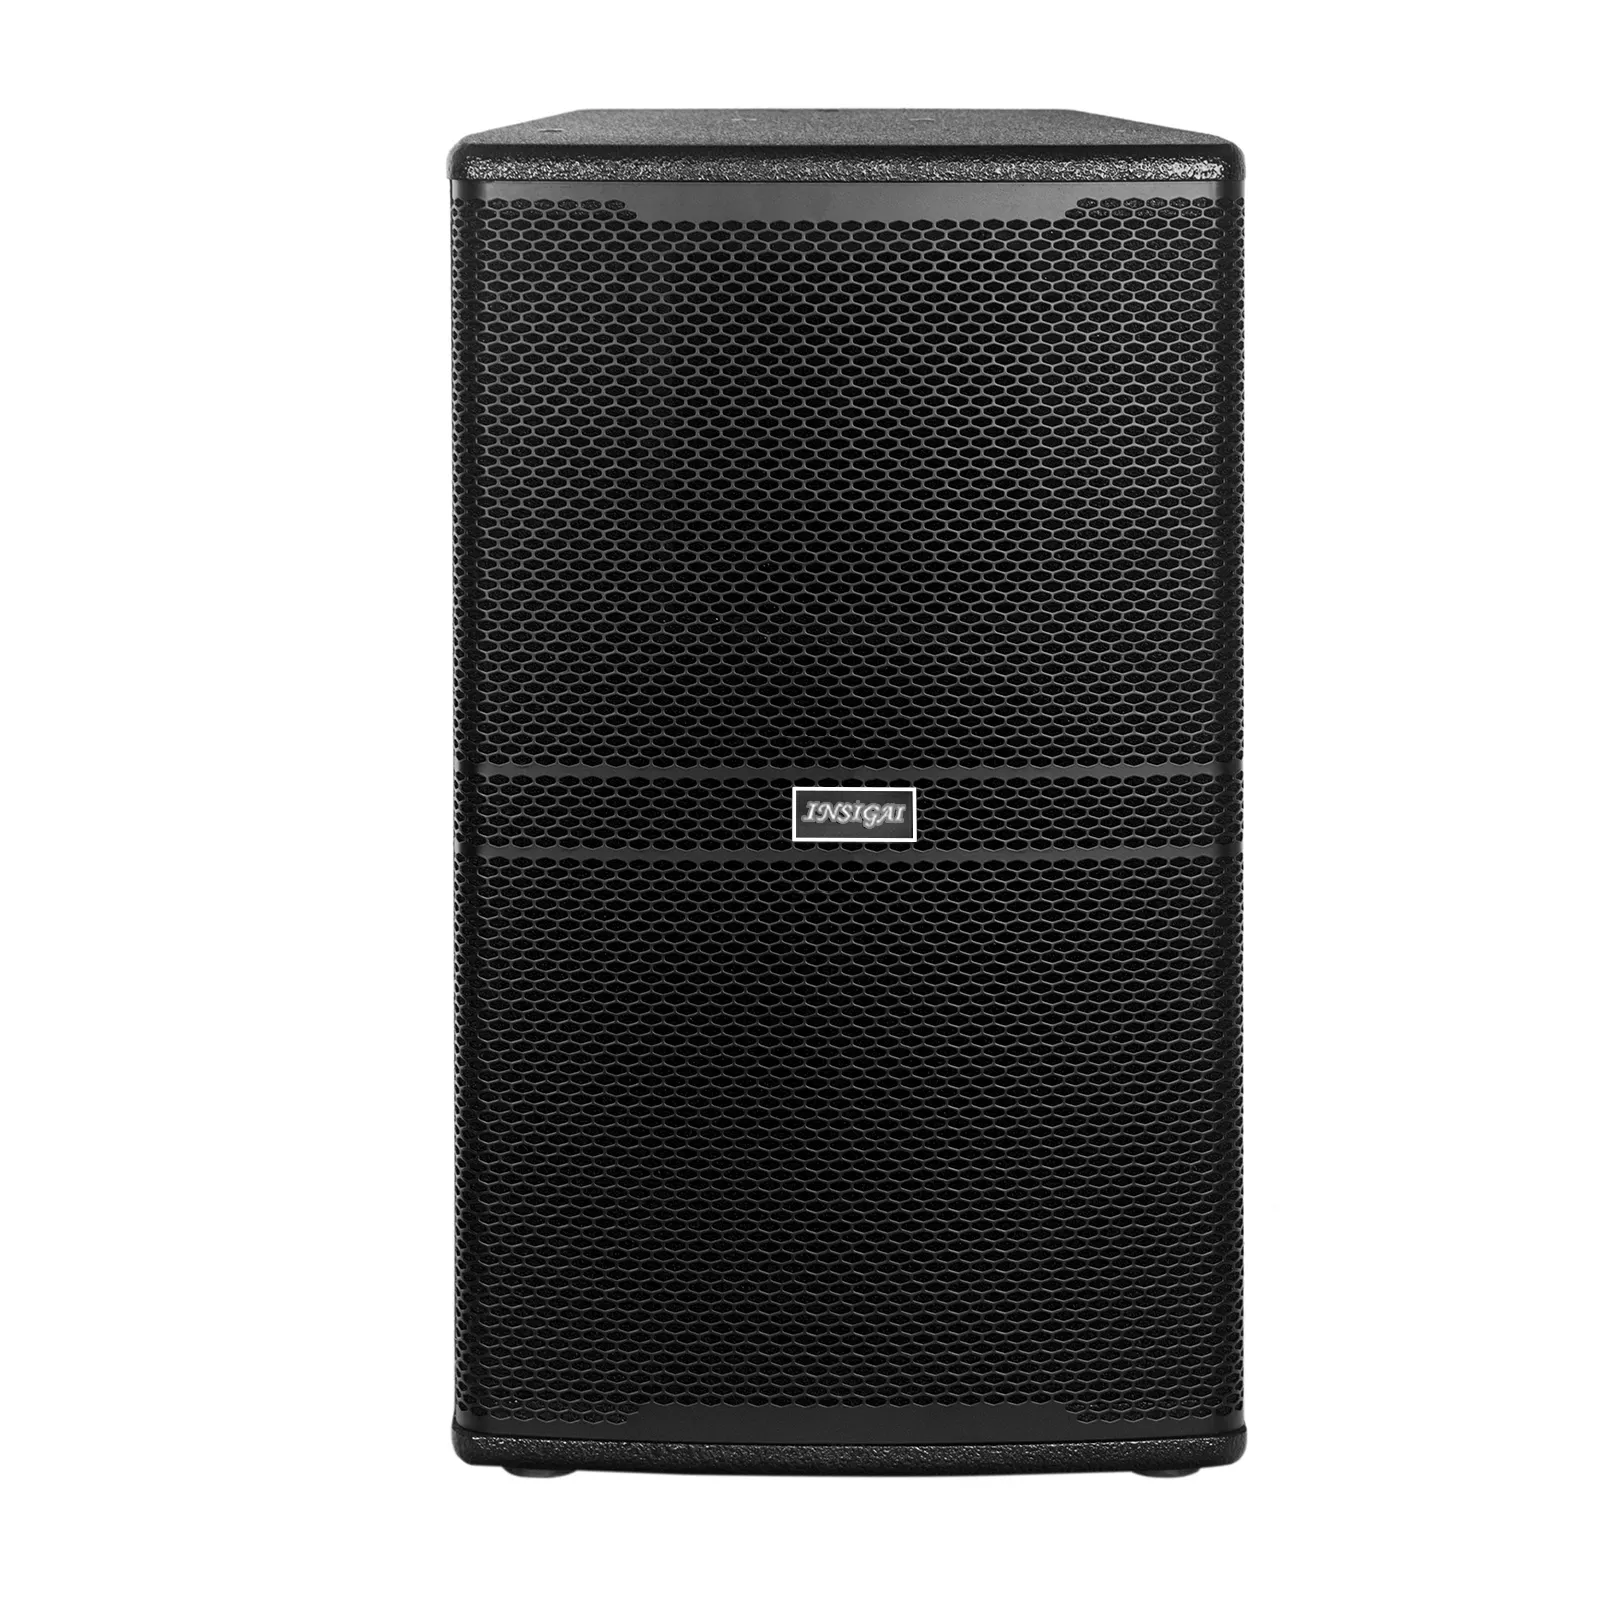 Custom Pro 1000W 15 Inch Active Surround Sound Speaker Professional Pro Audio mid range Out/Indoor Speaker For Stage Performance